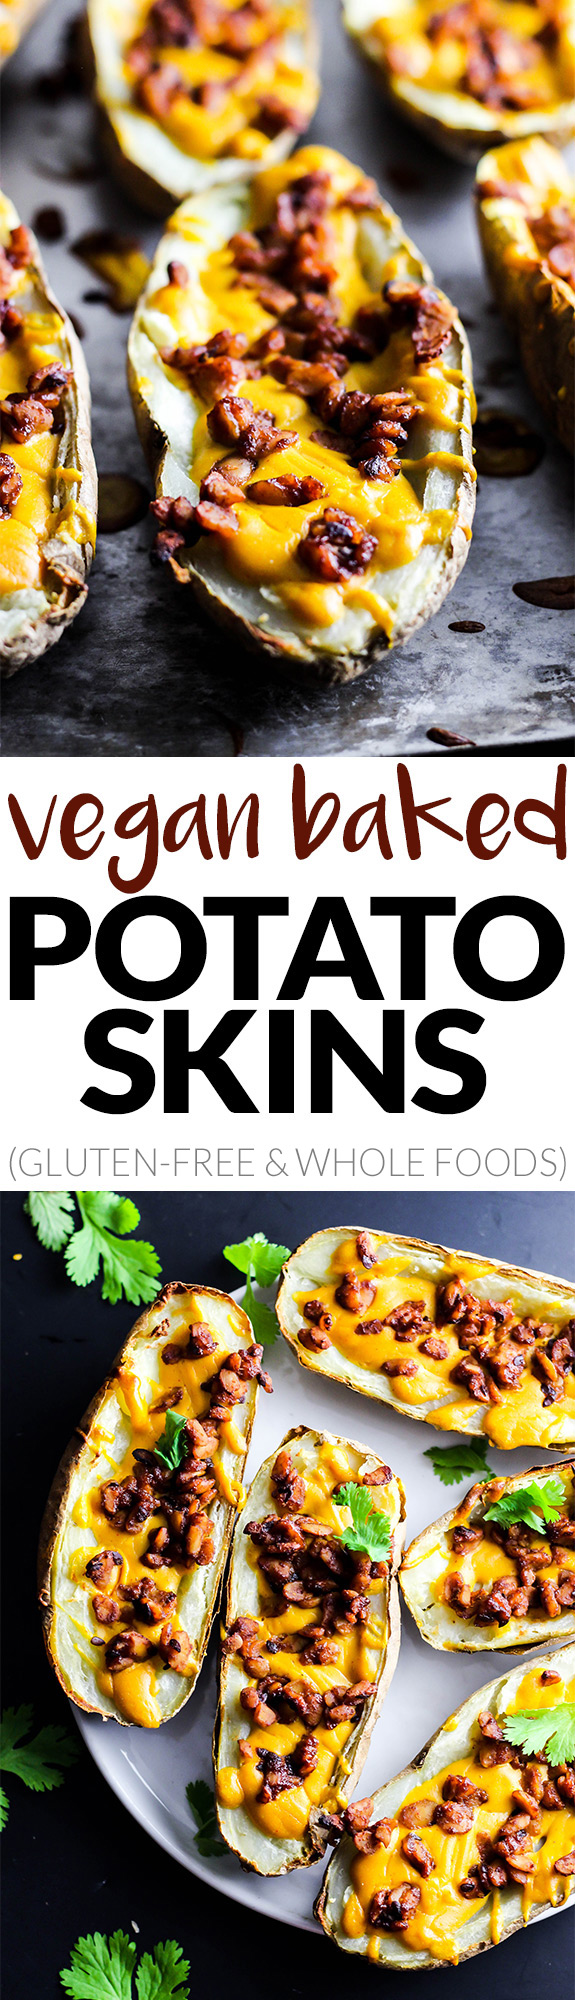 A delicious, vegan version of your favorite appetizer! Serve these Baked Potato Skins at your Superbowl party or any gathering to impress all your guests. Gluten-free & made with whole, plant foods.